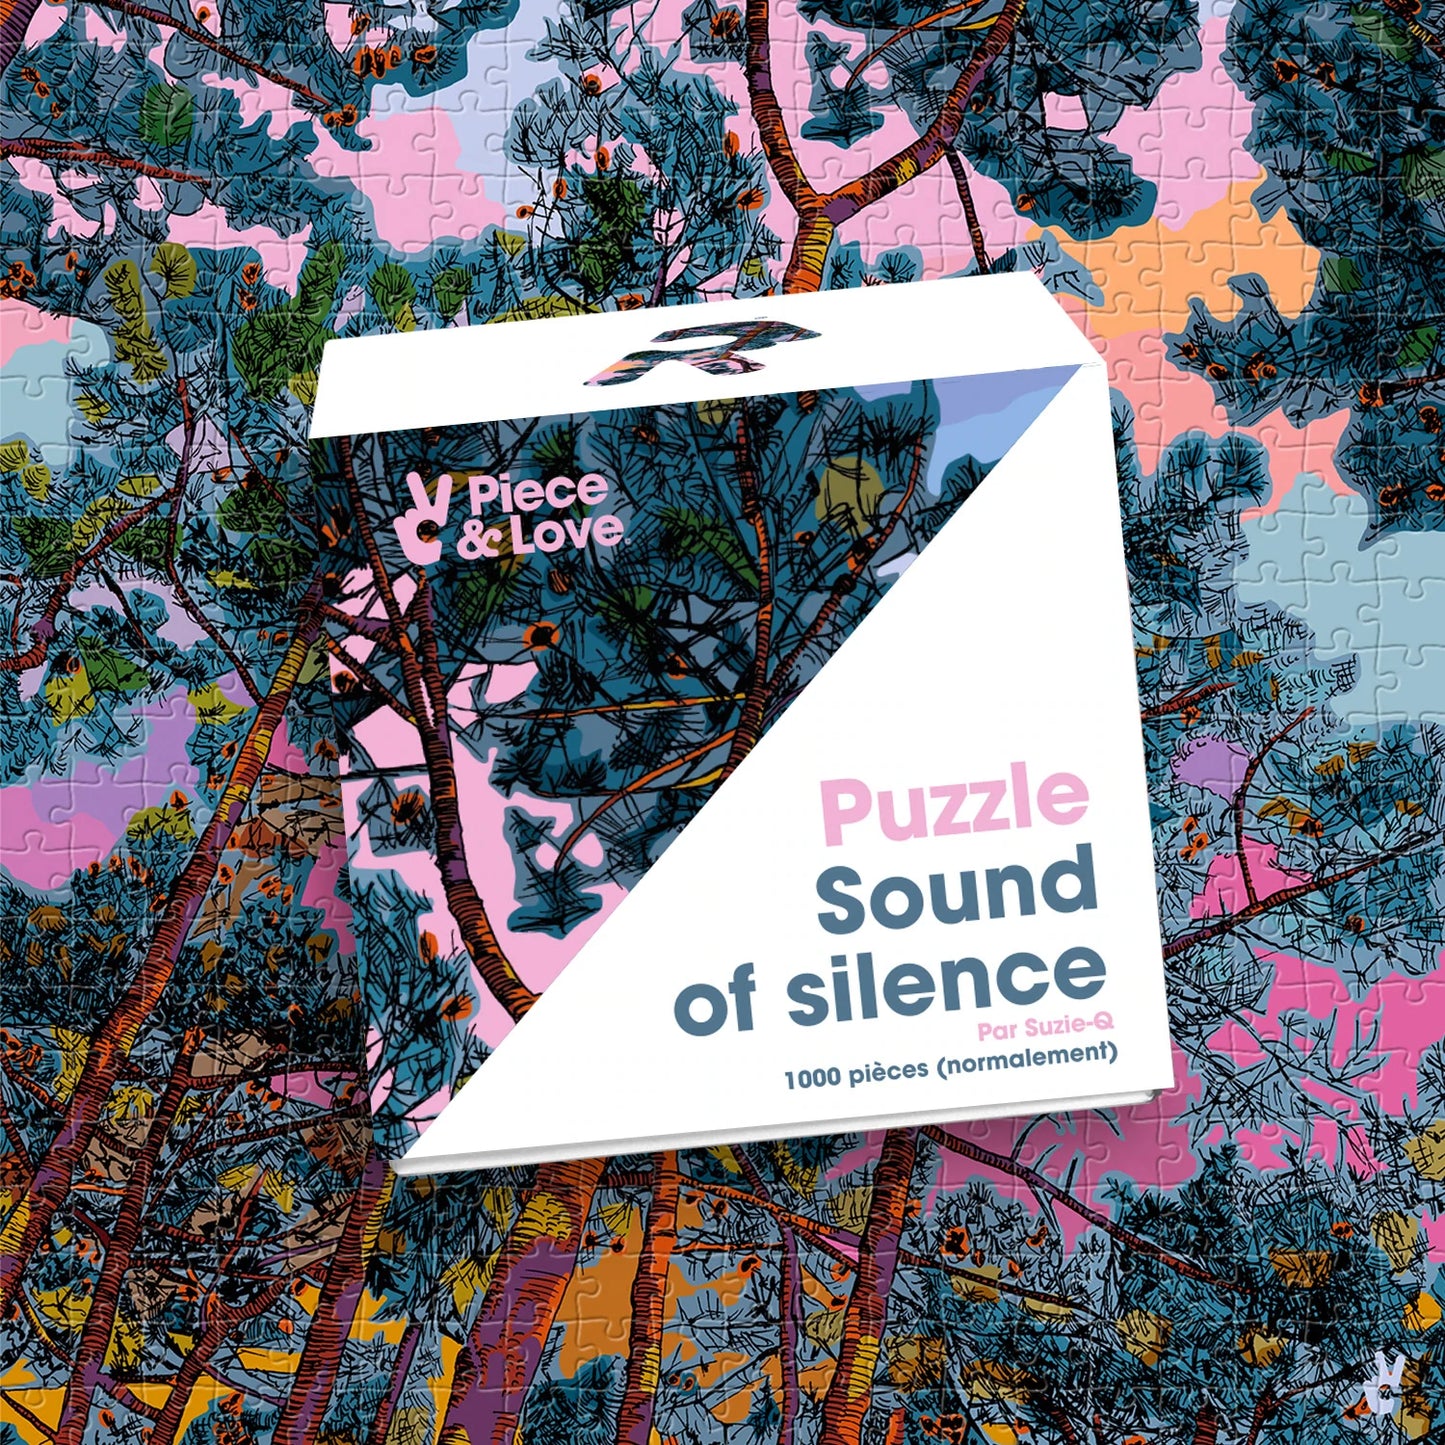 Puzzle 1000 pièces I Sound of silence by Suzie-Q I Piece & Love